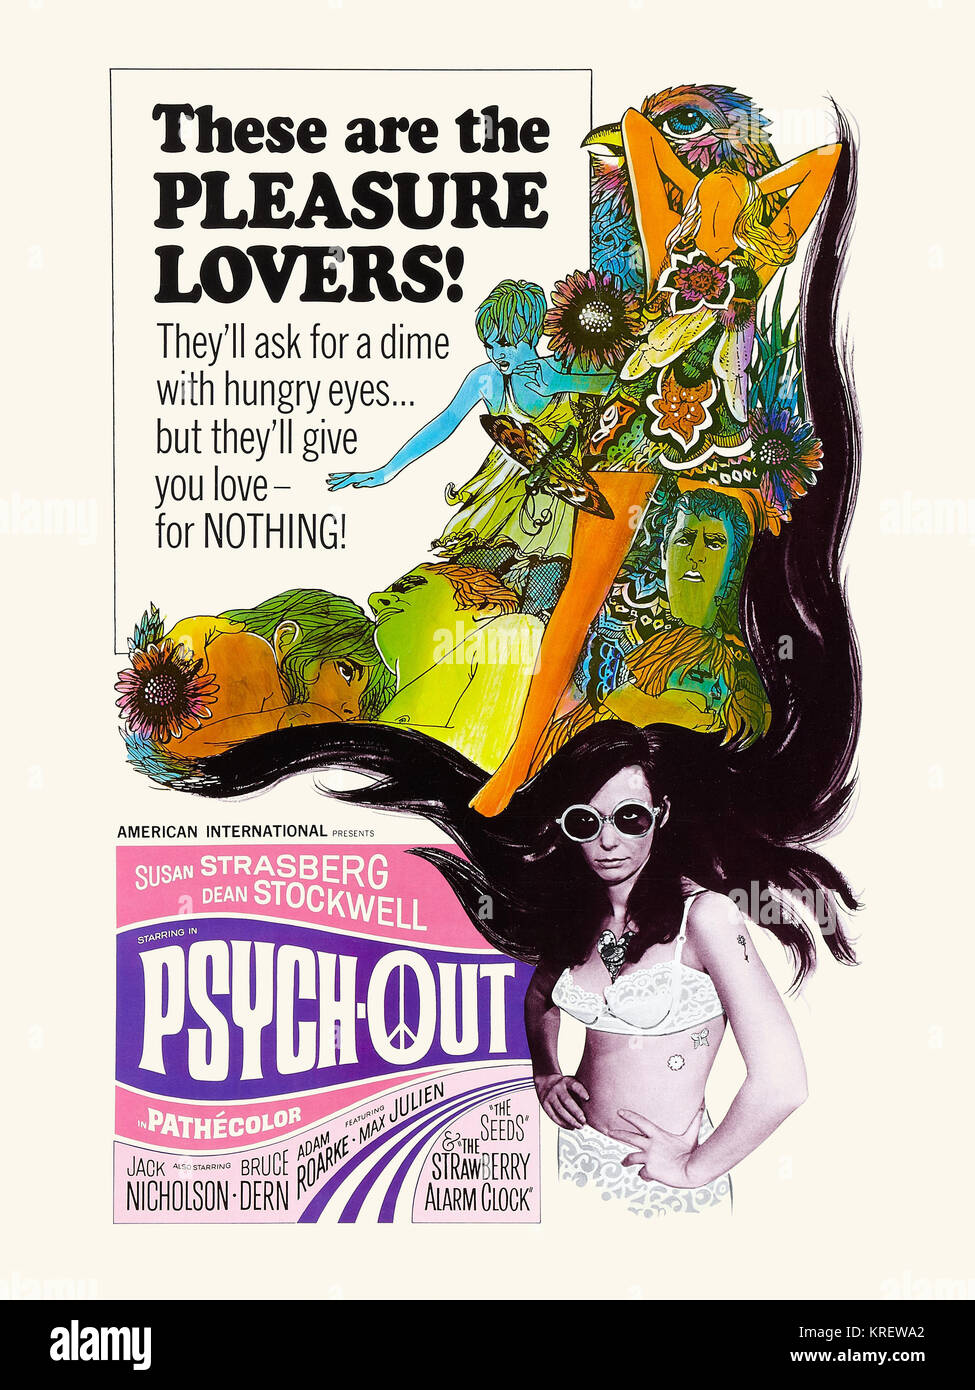 Pleasure Lovers -Psych Out Stock Photo